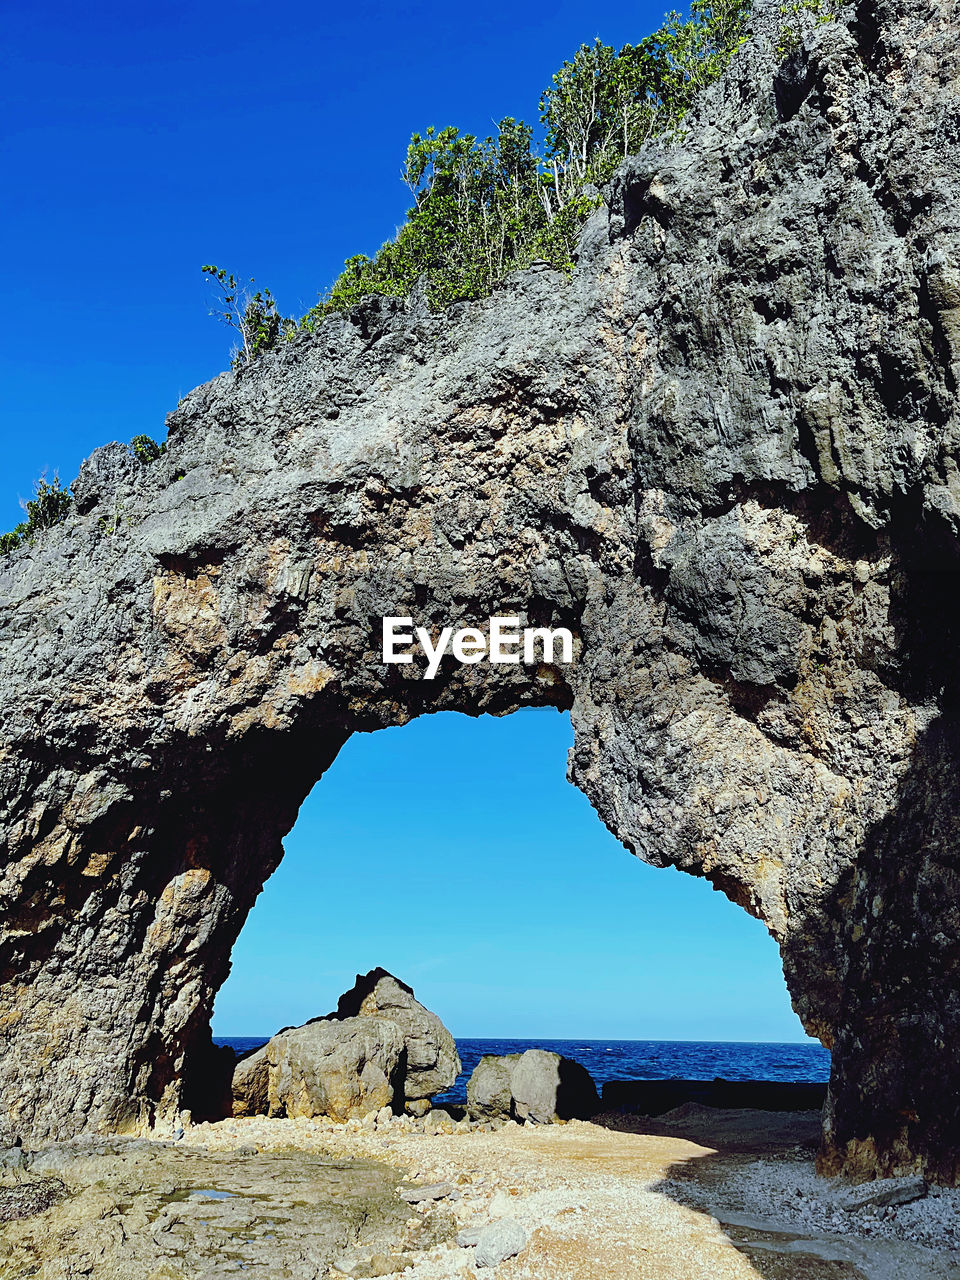 rock, sky, natural arch, clear sky, nature, rock formation, sea, arch, blue, land, beauty in nature, scenics - nature, water, coast, sunny, cave, tranquility, travel destinations, formation, no people, geology, sunlight, architecture, cliff, non-urban scene, travel, environment, physical geography, day, landscape, eroded, outdoors, outdoor pursuit, hole, idyllic, plant, tranquil scene, beach, extreme terrain, terrain, limestone, mountain, tree, history, nature reserve, tourism, ancient history, sea cave, activity, pinaceae